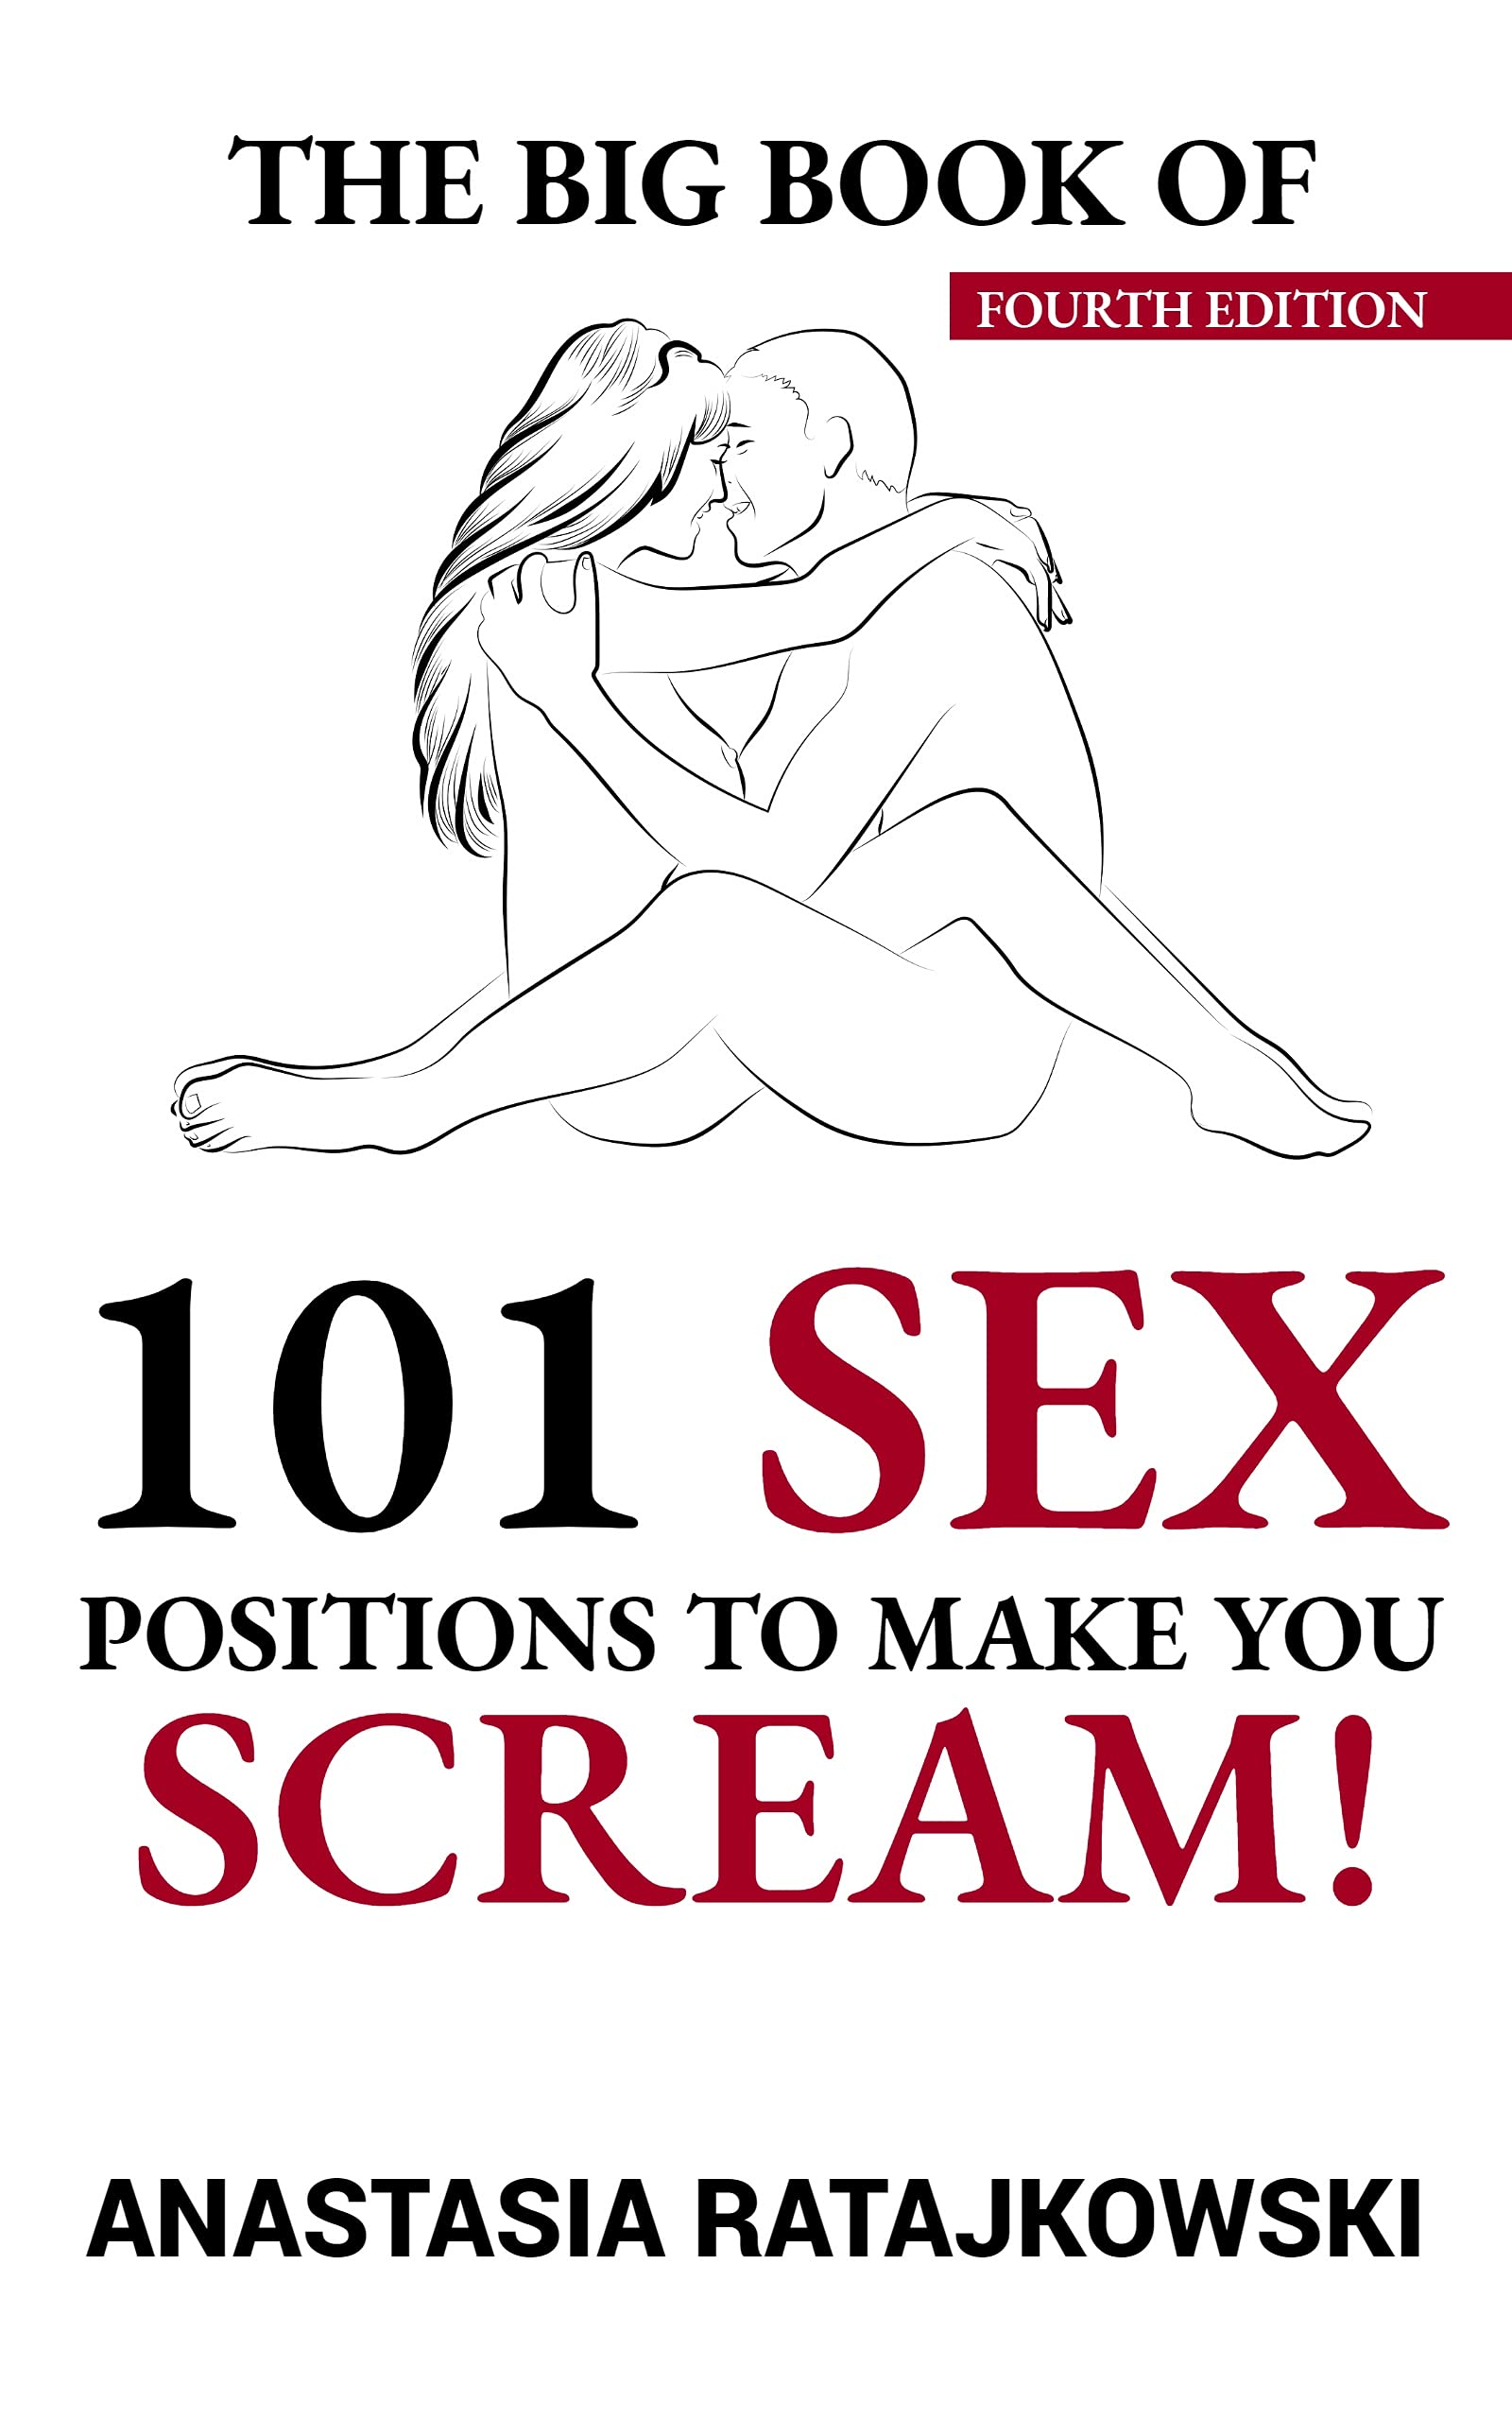 christian sorenson recommends 101 sex positions pdf pic